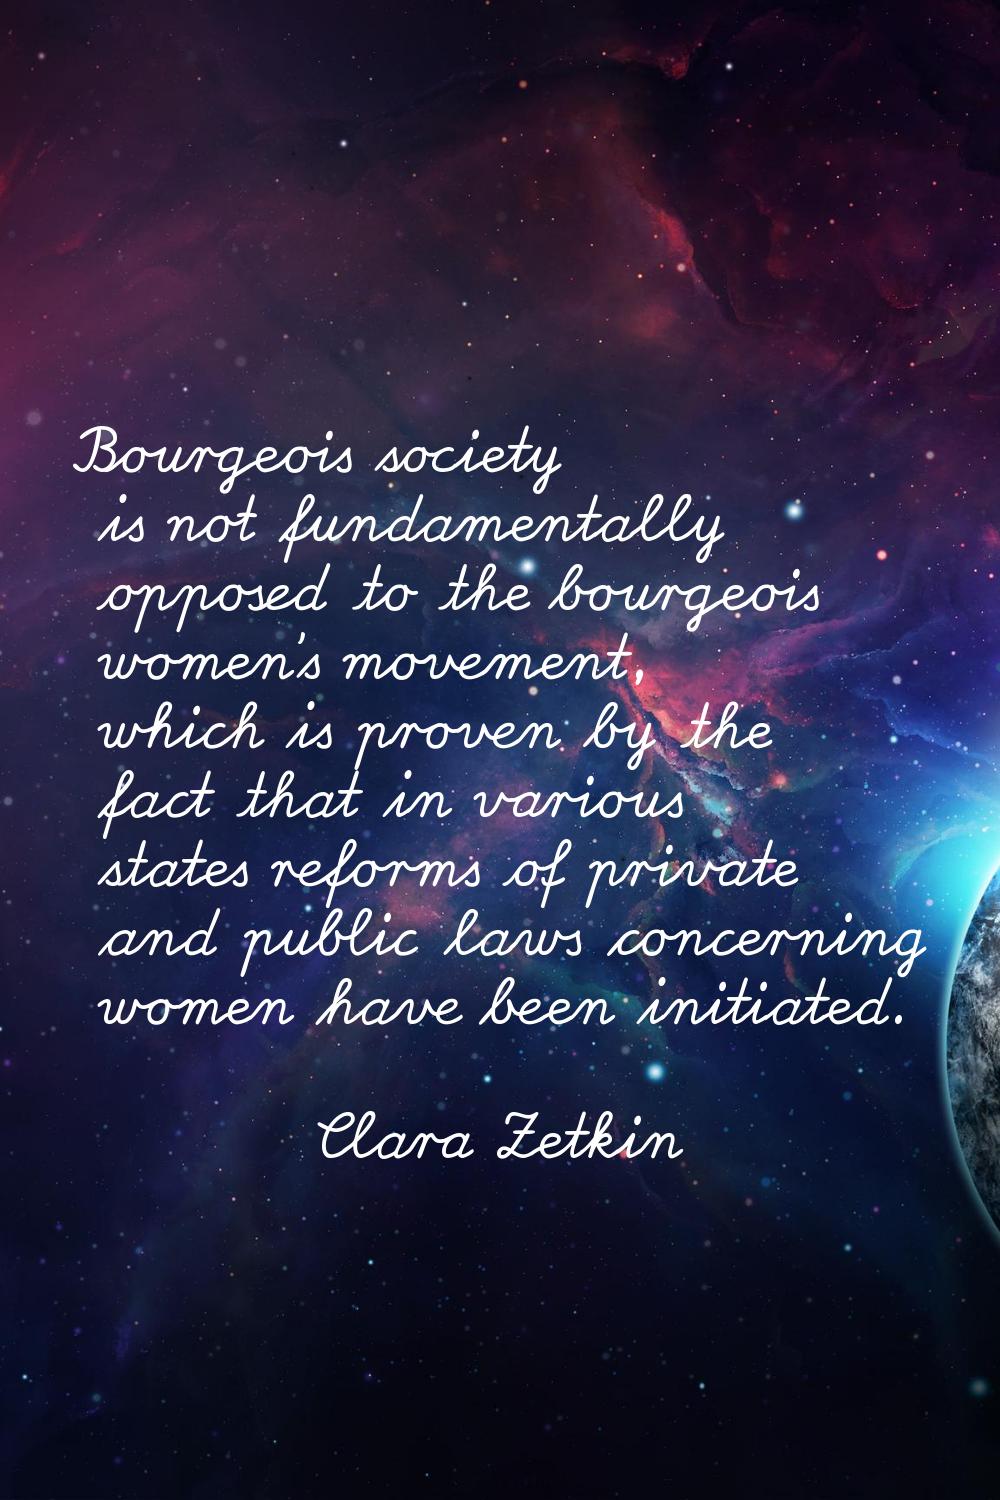 Bourgeois society is not fundamentally opposed to the bourgeois women's movement, which is proven b